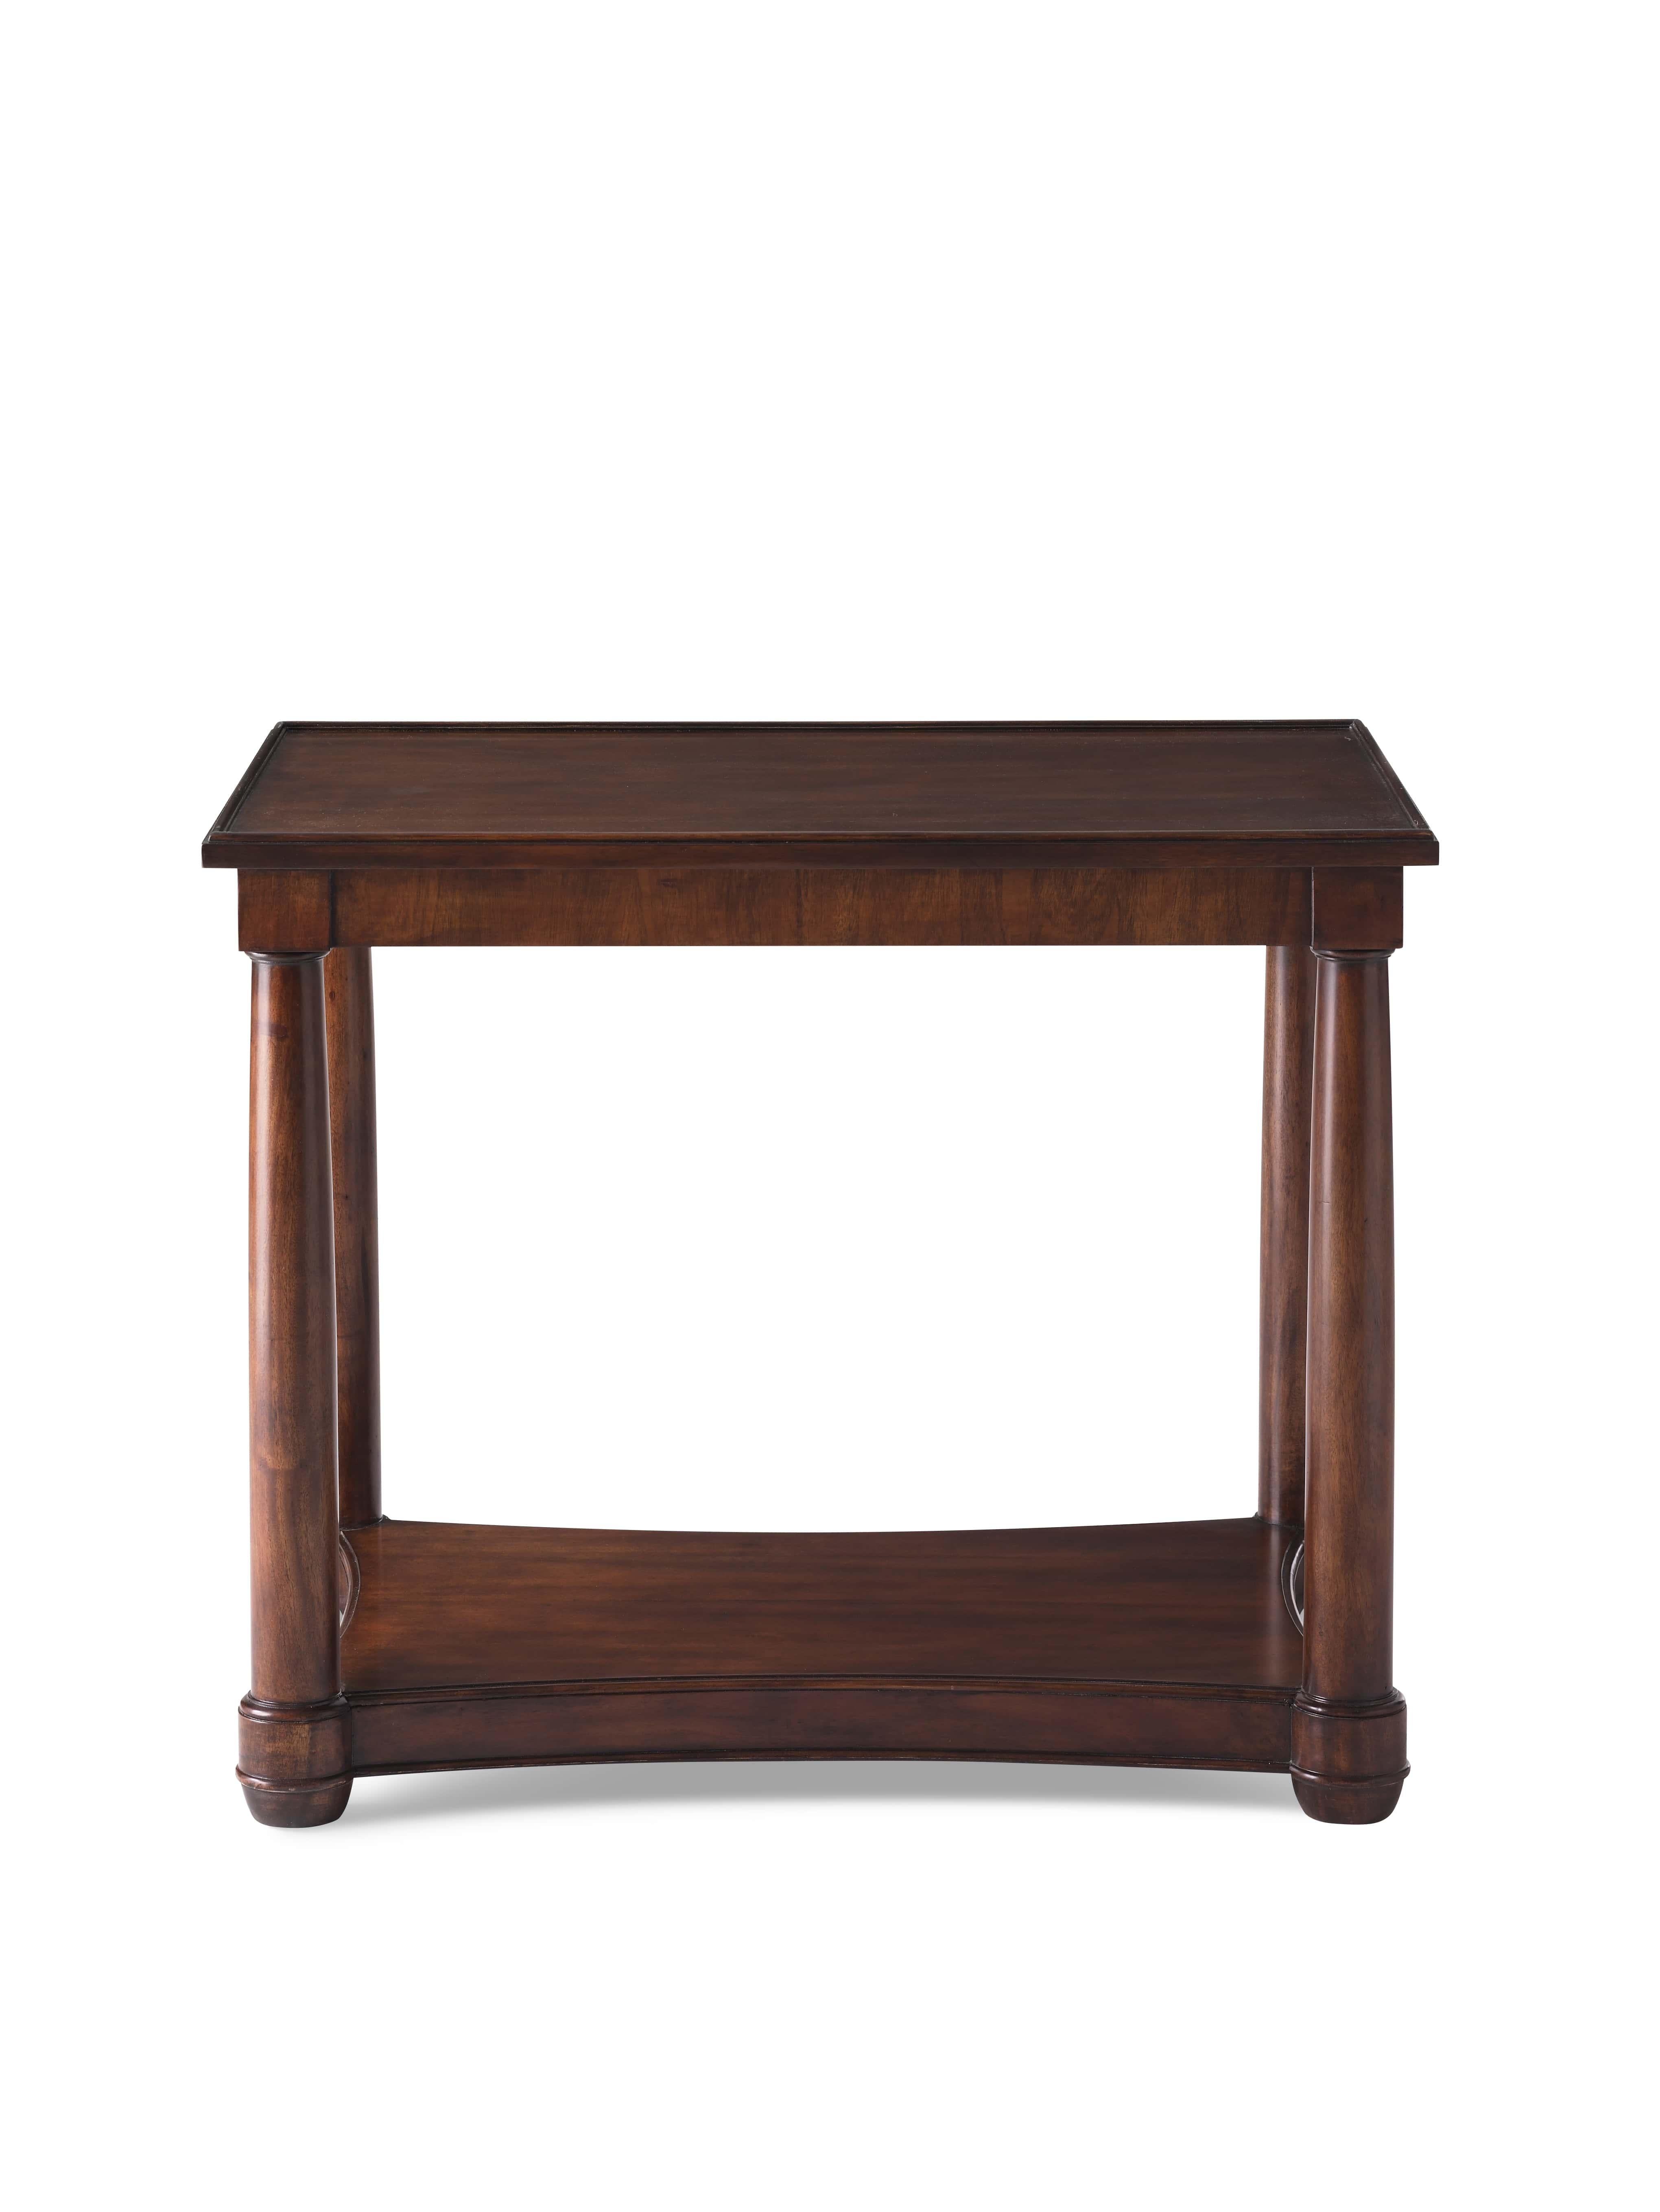 This gentlemanly-proportioned side table is well suited to flank a larger, more grandly scaled sofa. A shaped bottom shelf adds extra storage, and would even work as an alternative to a large bar cart. Available in a medium mahogany painted finish. 